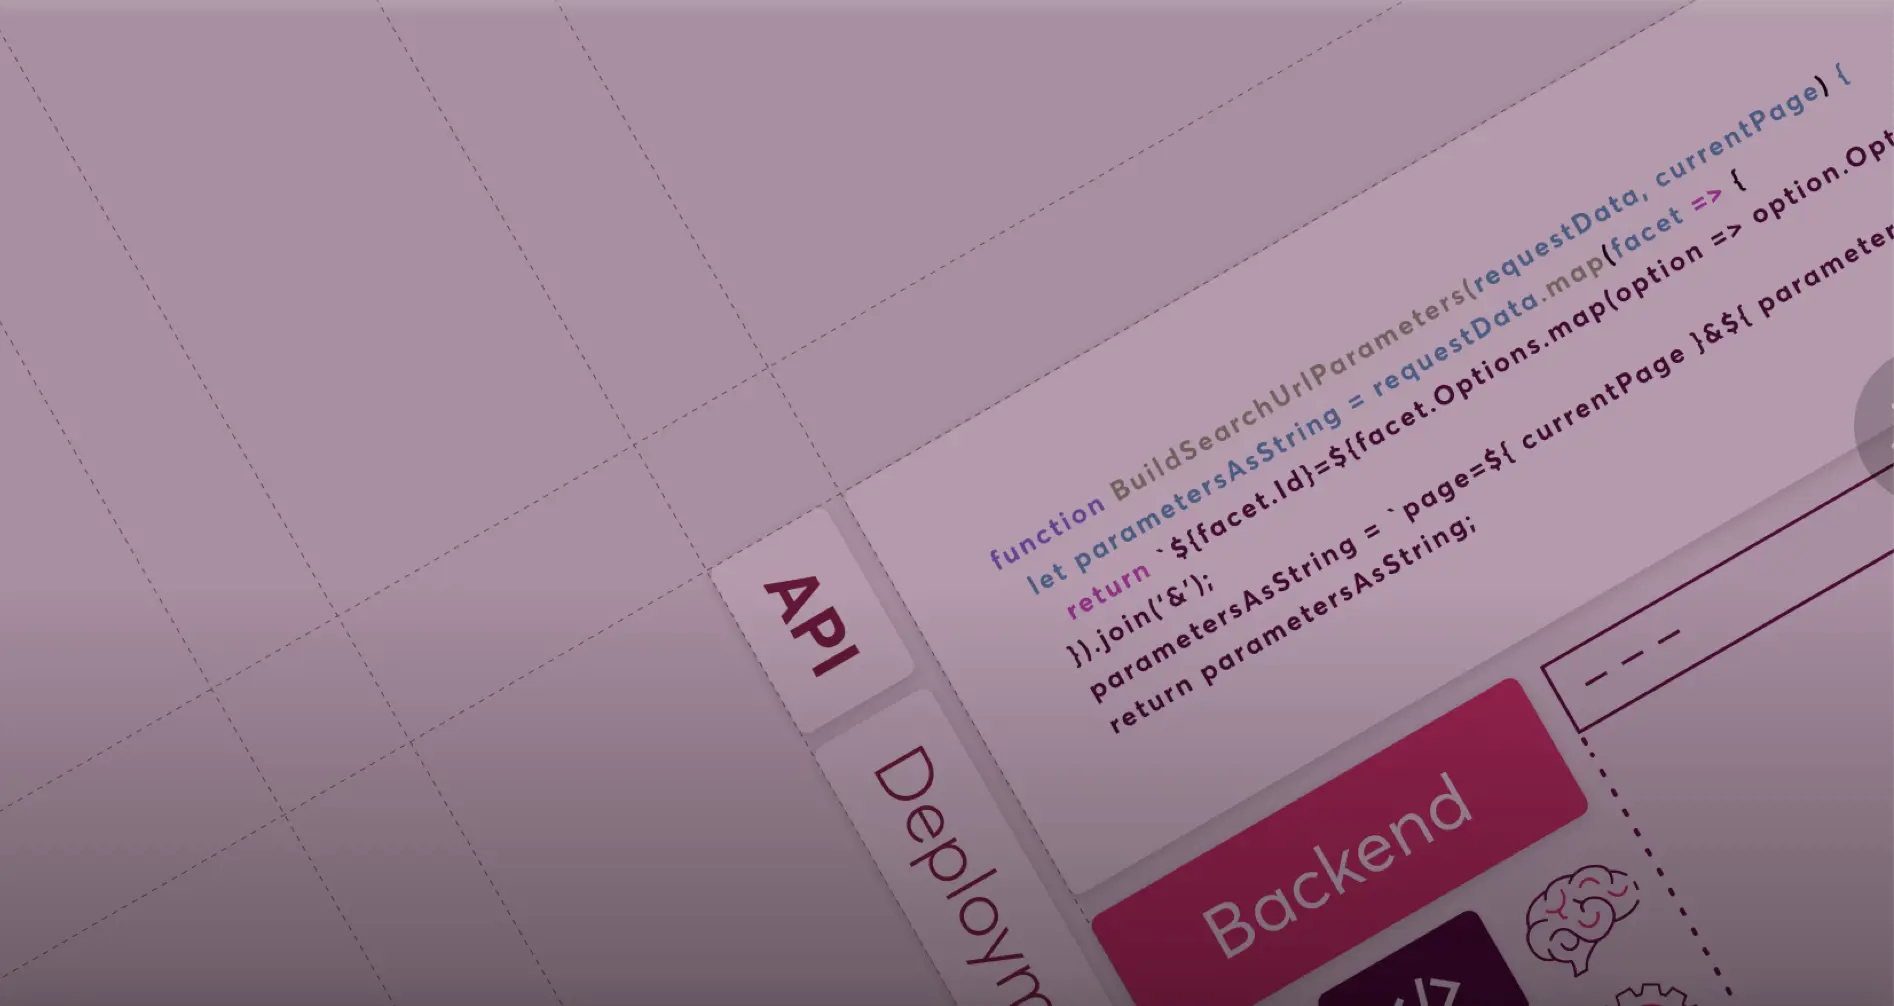 A purple-tinted image showing a portion of code related to building a search URL